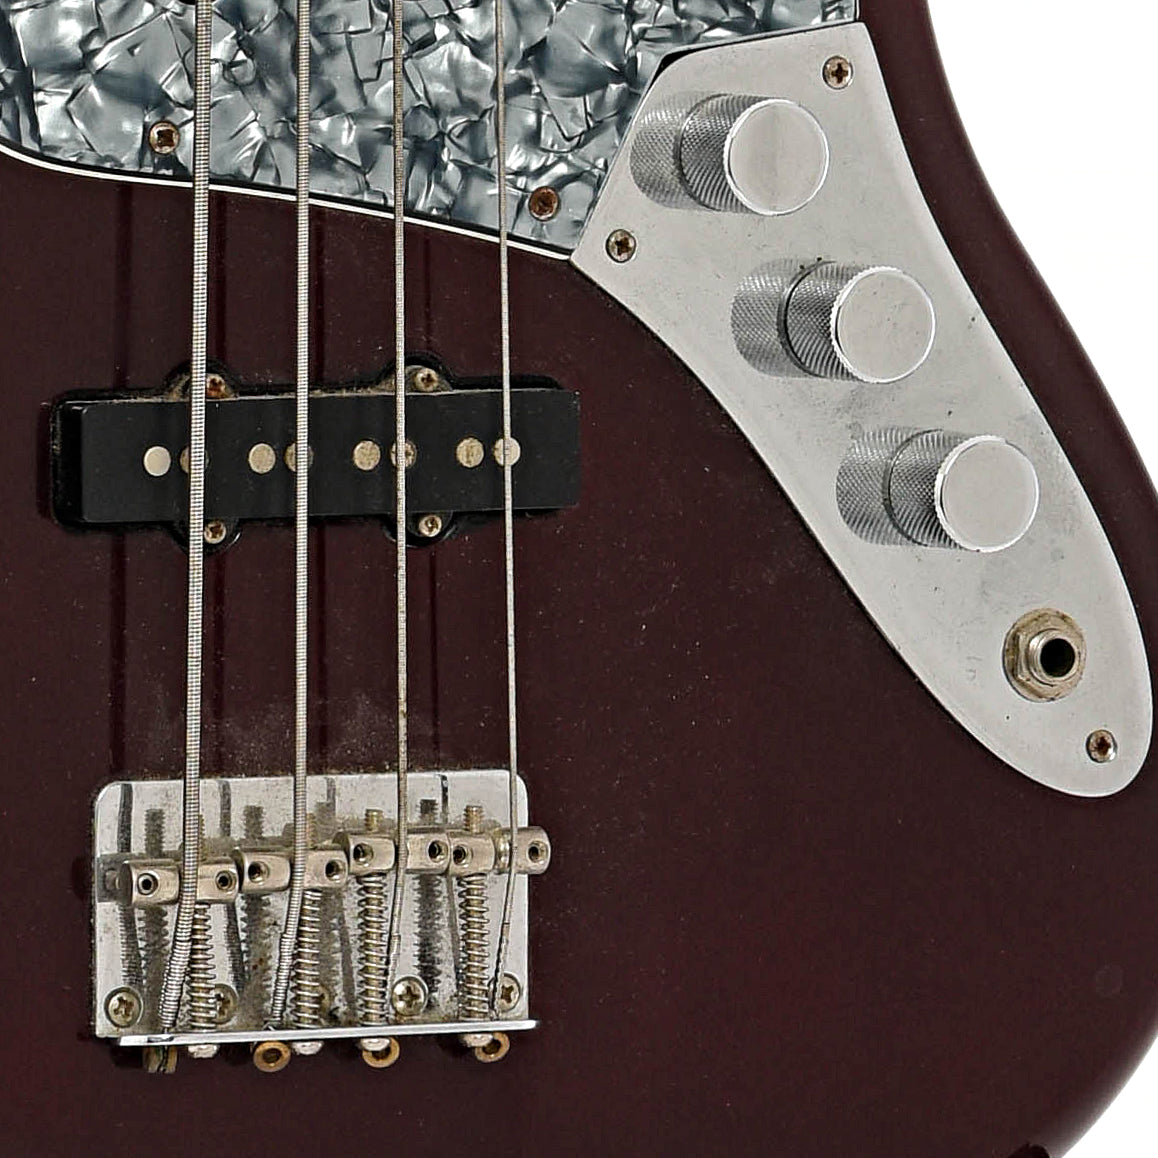 Bridge and controls of Fender Standard Jazz 4-String Electric Bass